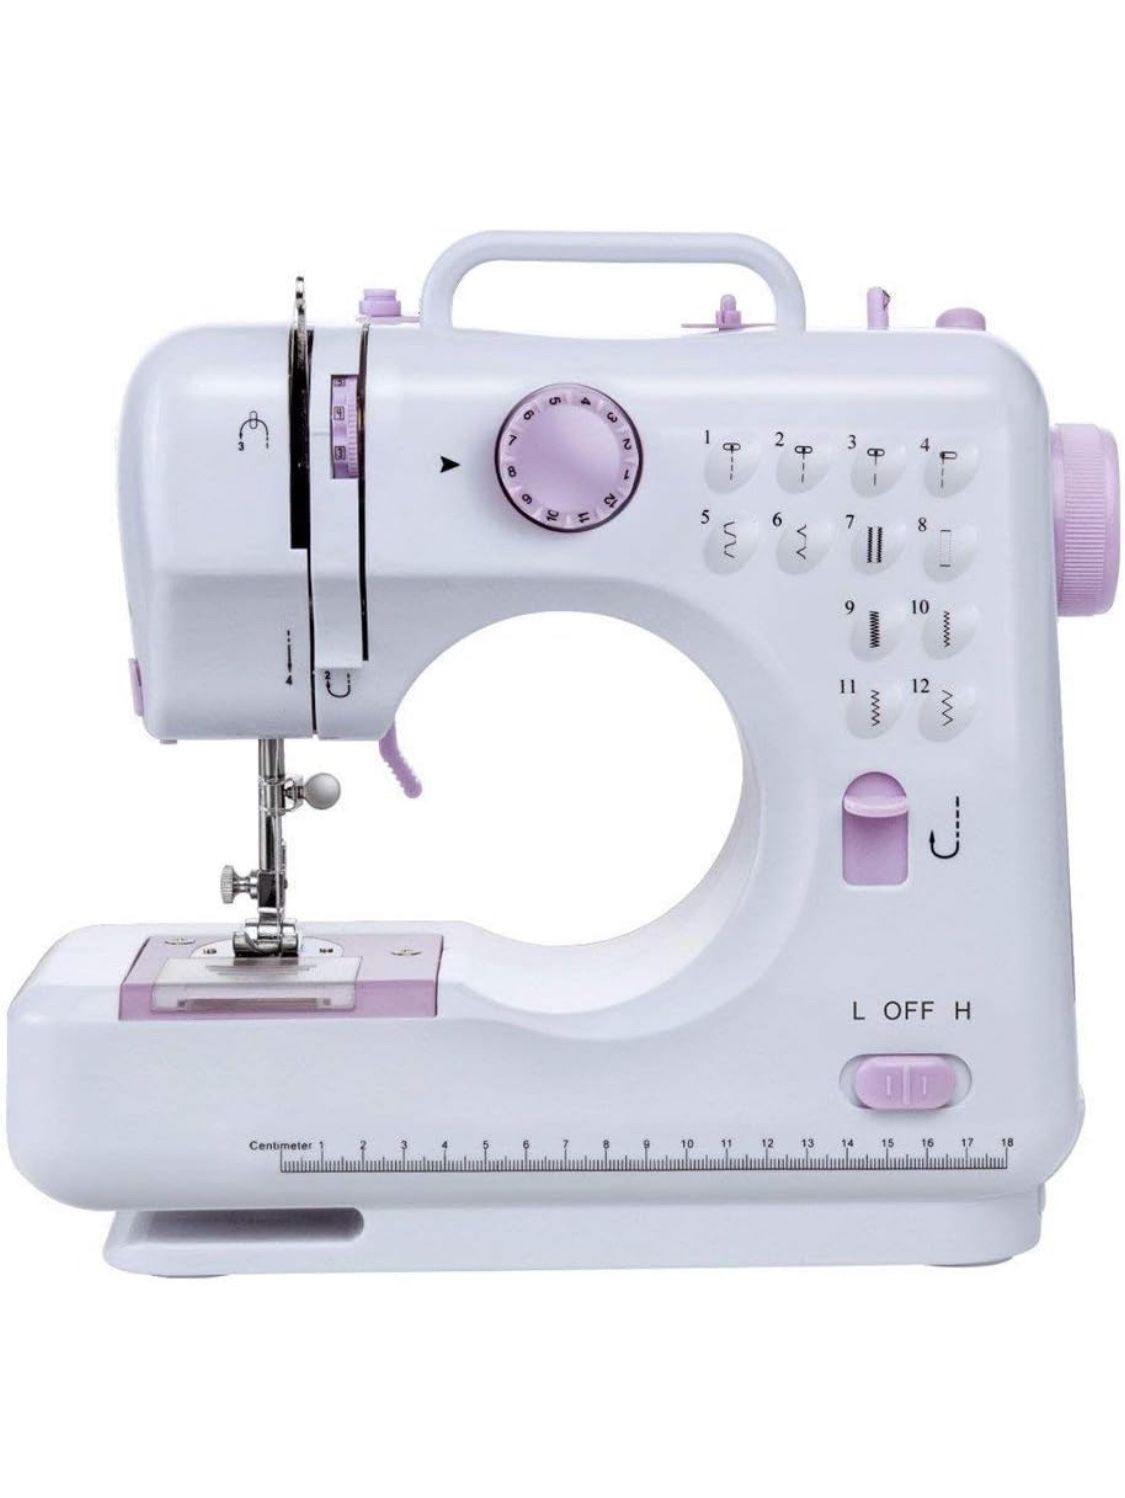 (Not Professional) Open Box (never used) 12 Stitch Multi-Function Sewing Machine